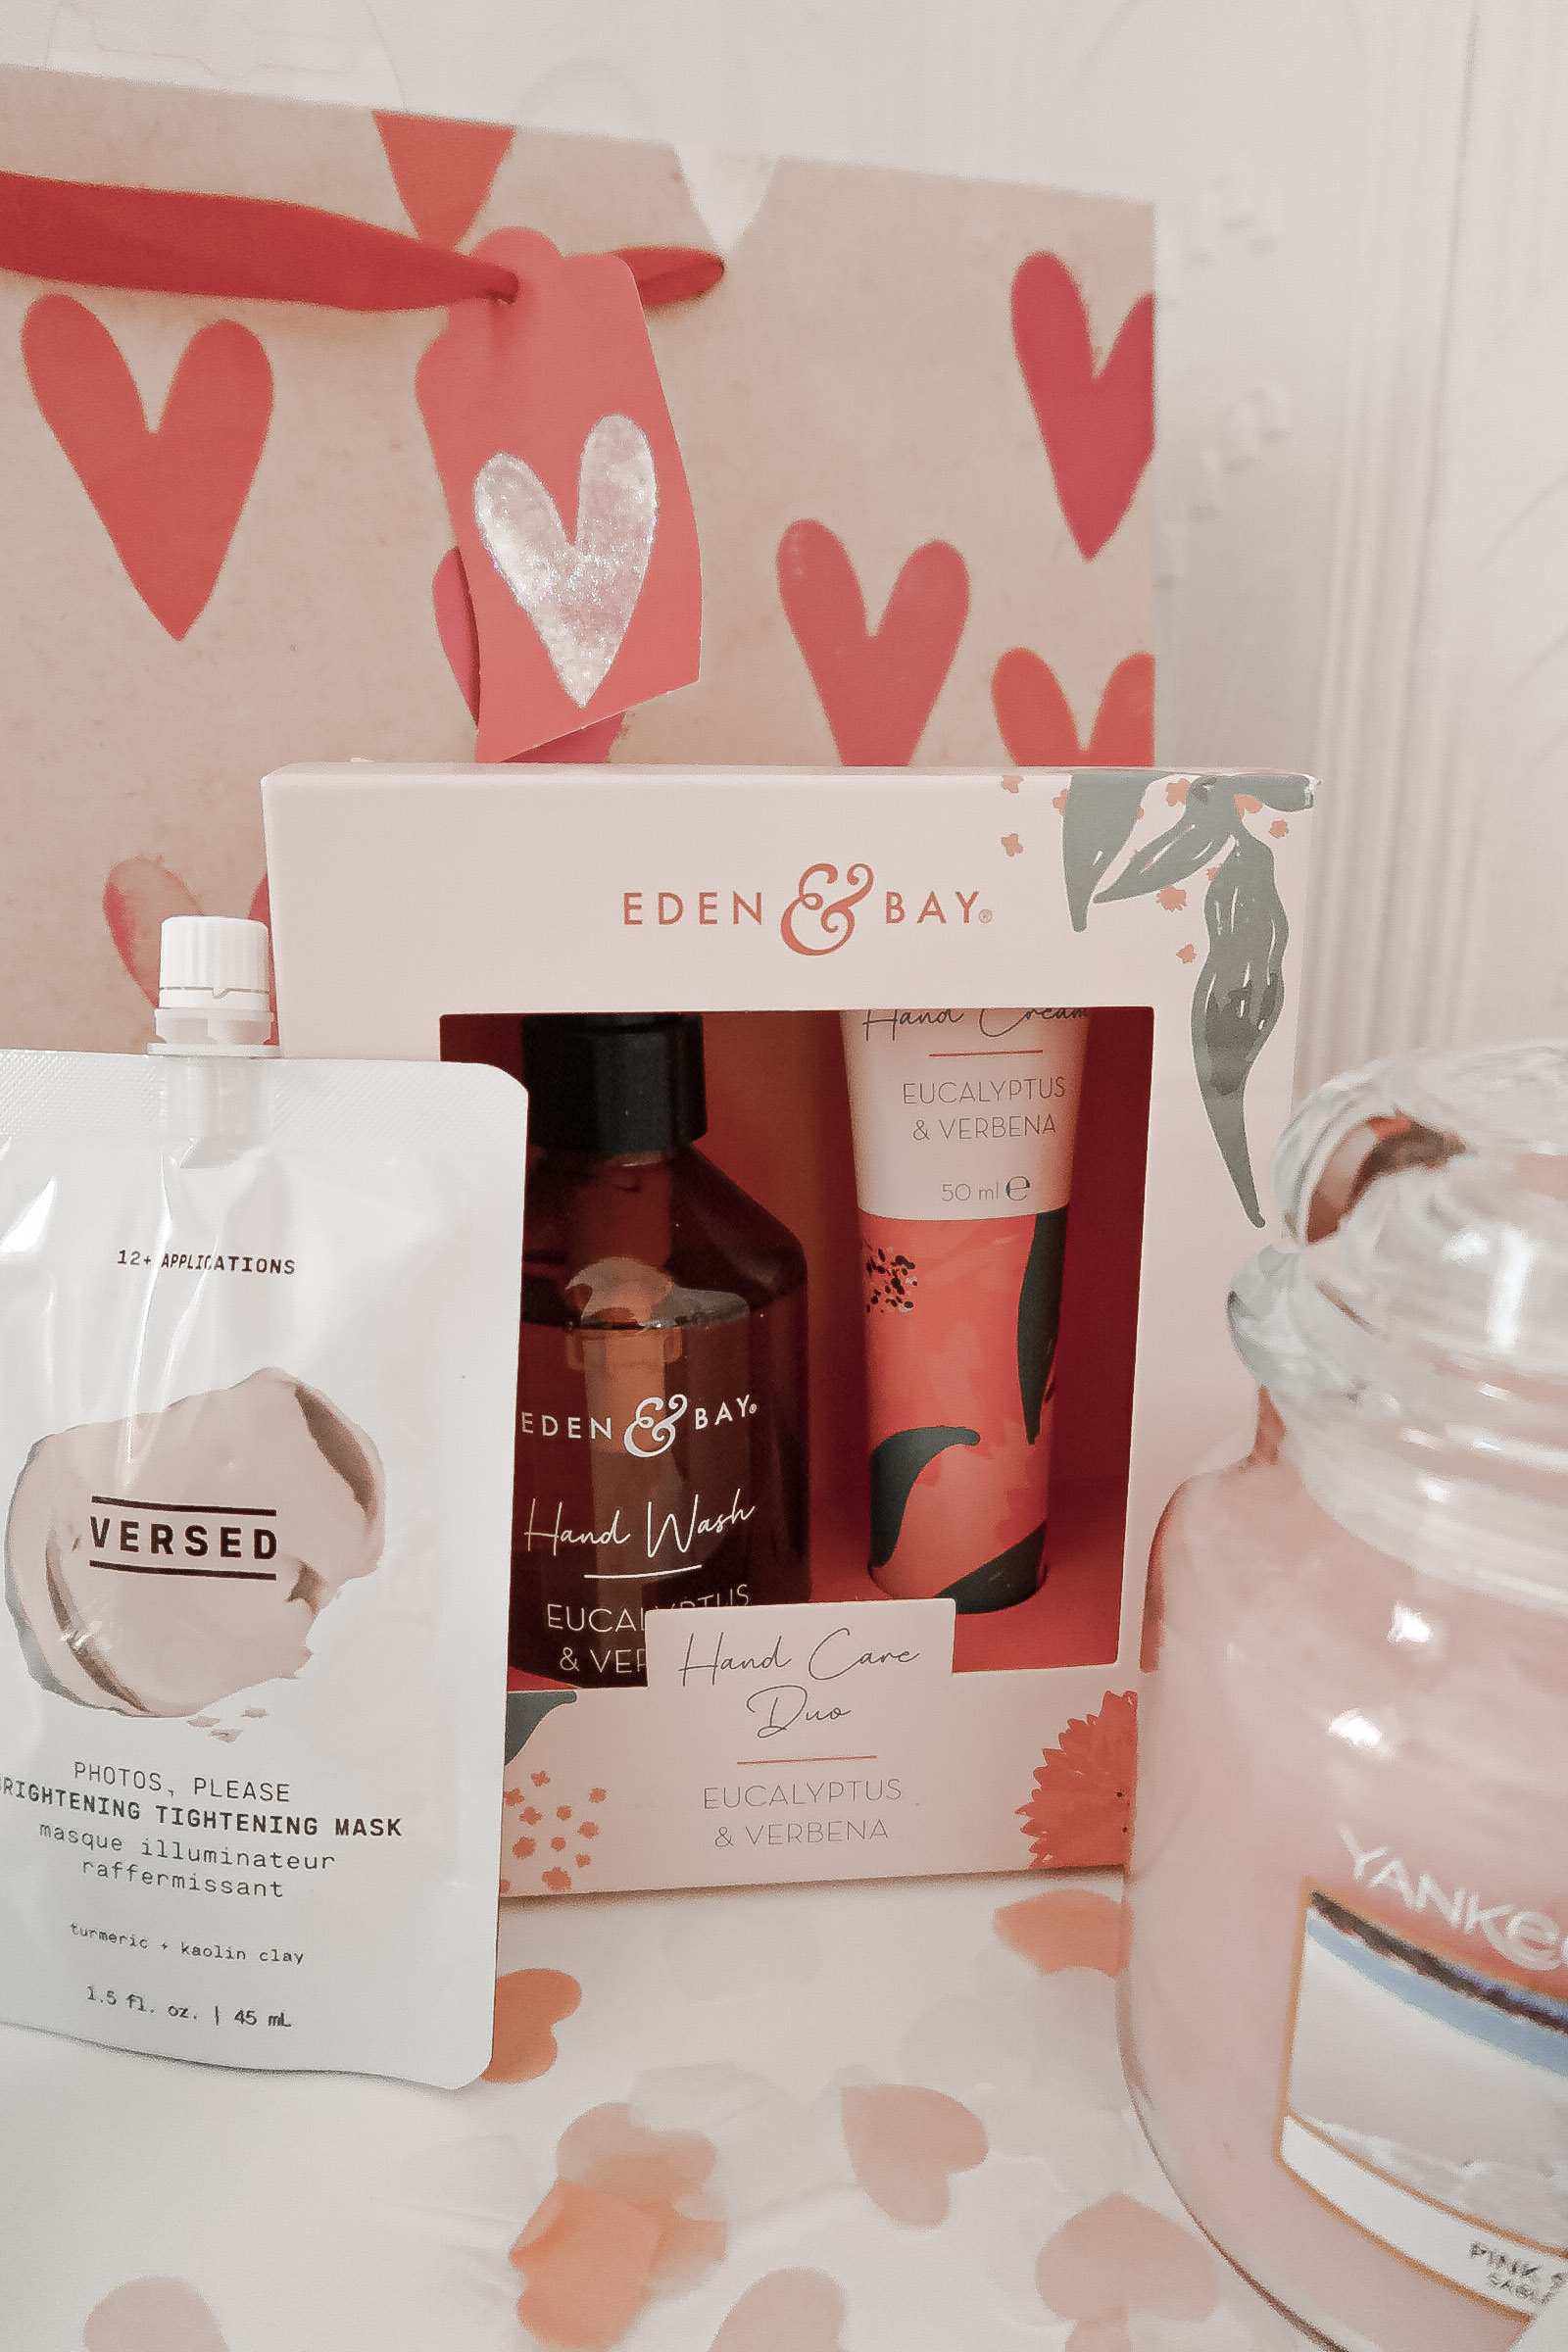 Valentine's Day Gifts from Boots Celebrating Love For All